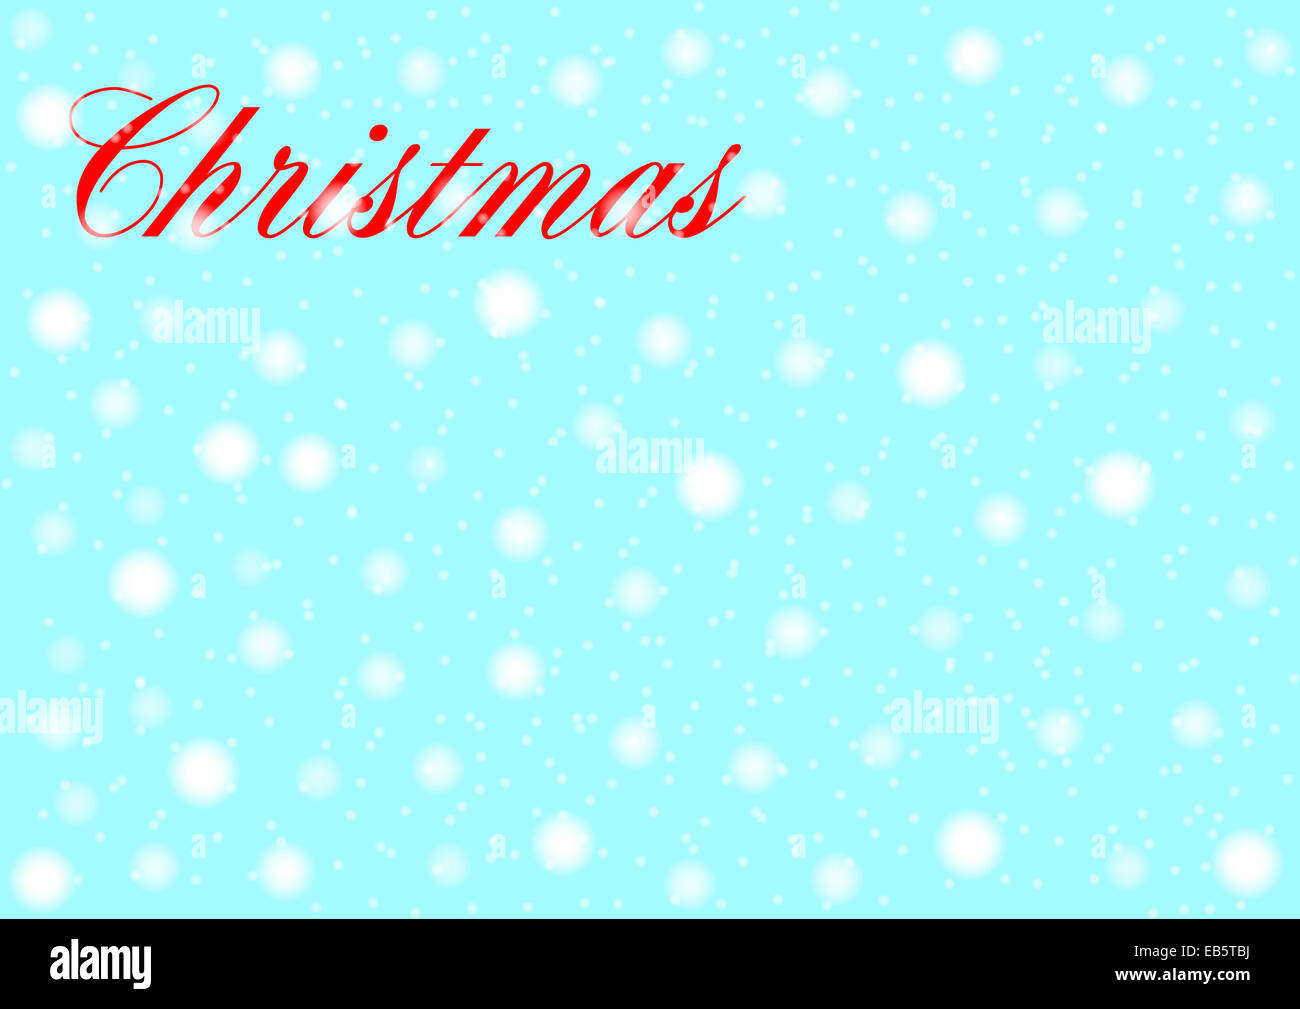 Christmas text against a falling snow background Stock Photo